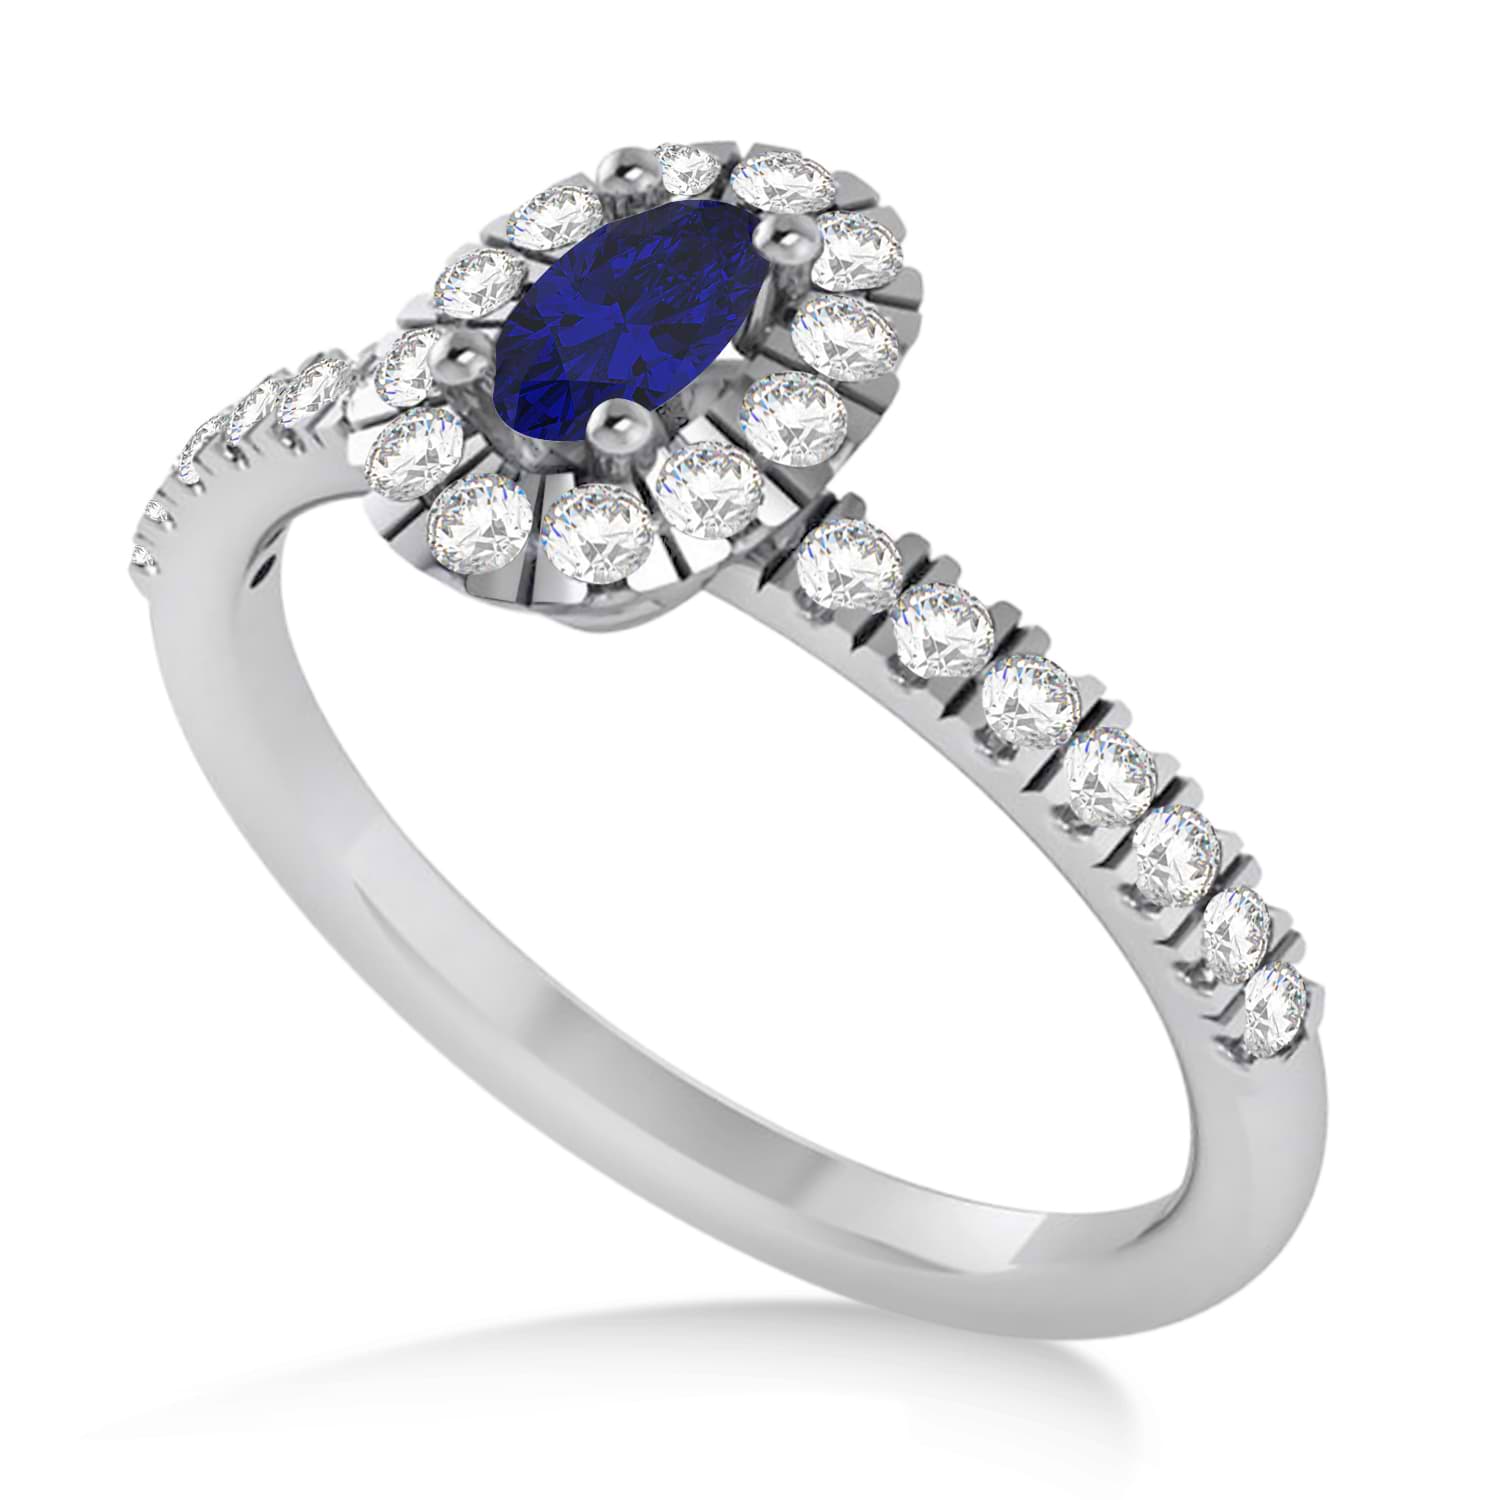 Oval Blue Sapphire & Diamond Halo Engagement Ring 14k White Gold (0.60ct)